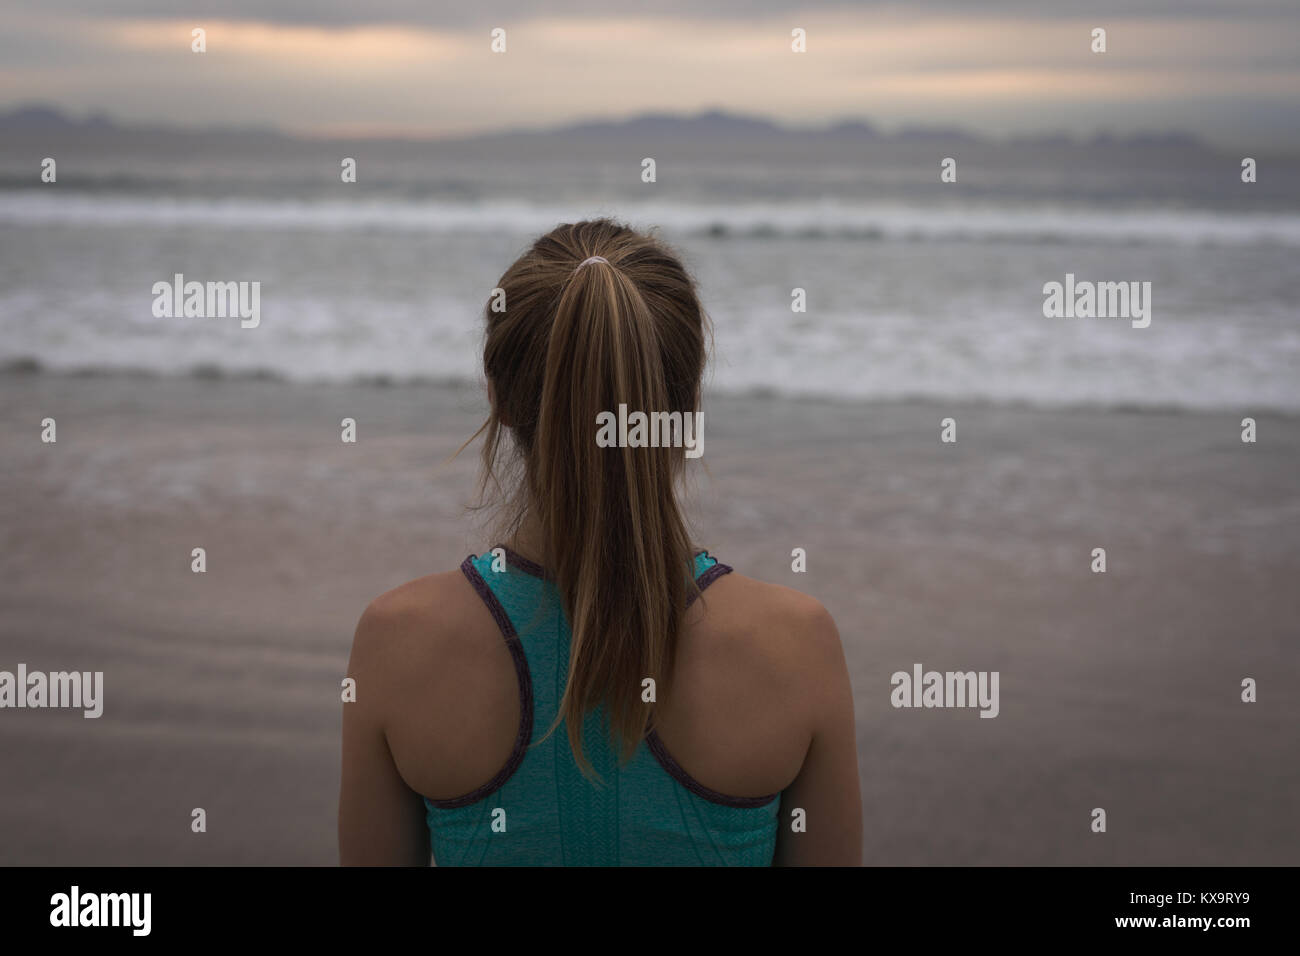 Woman in sports wear with ponytail standing at beachfront Stock Photo